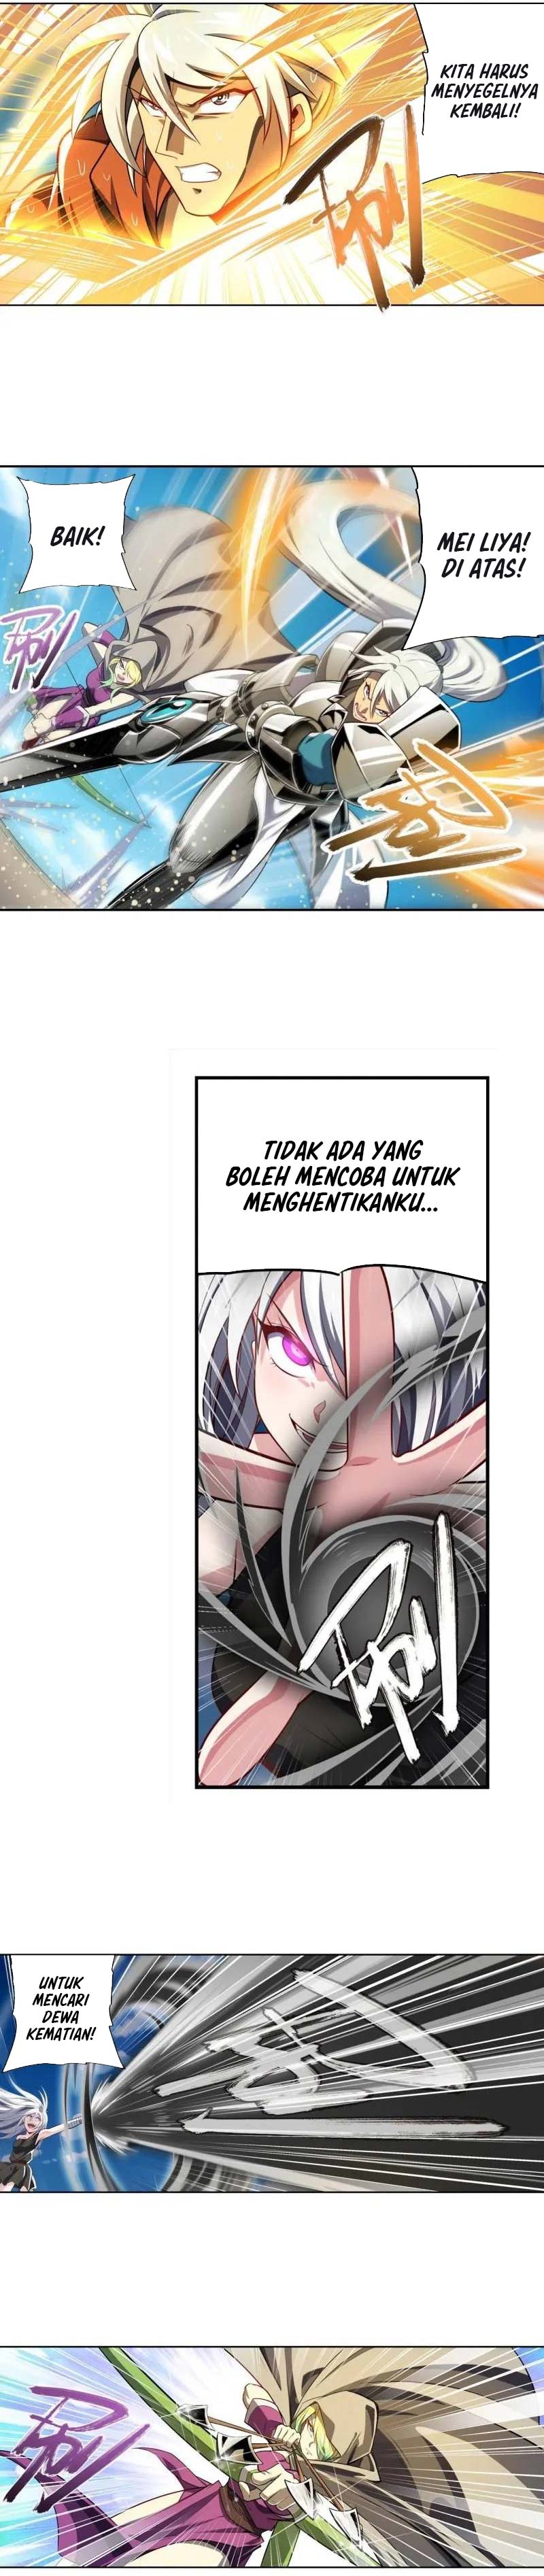 Hero I Quit A Long Time Ago Chapter 416